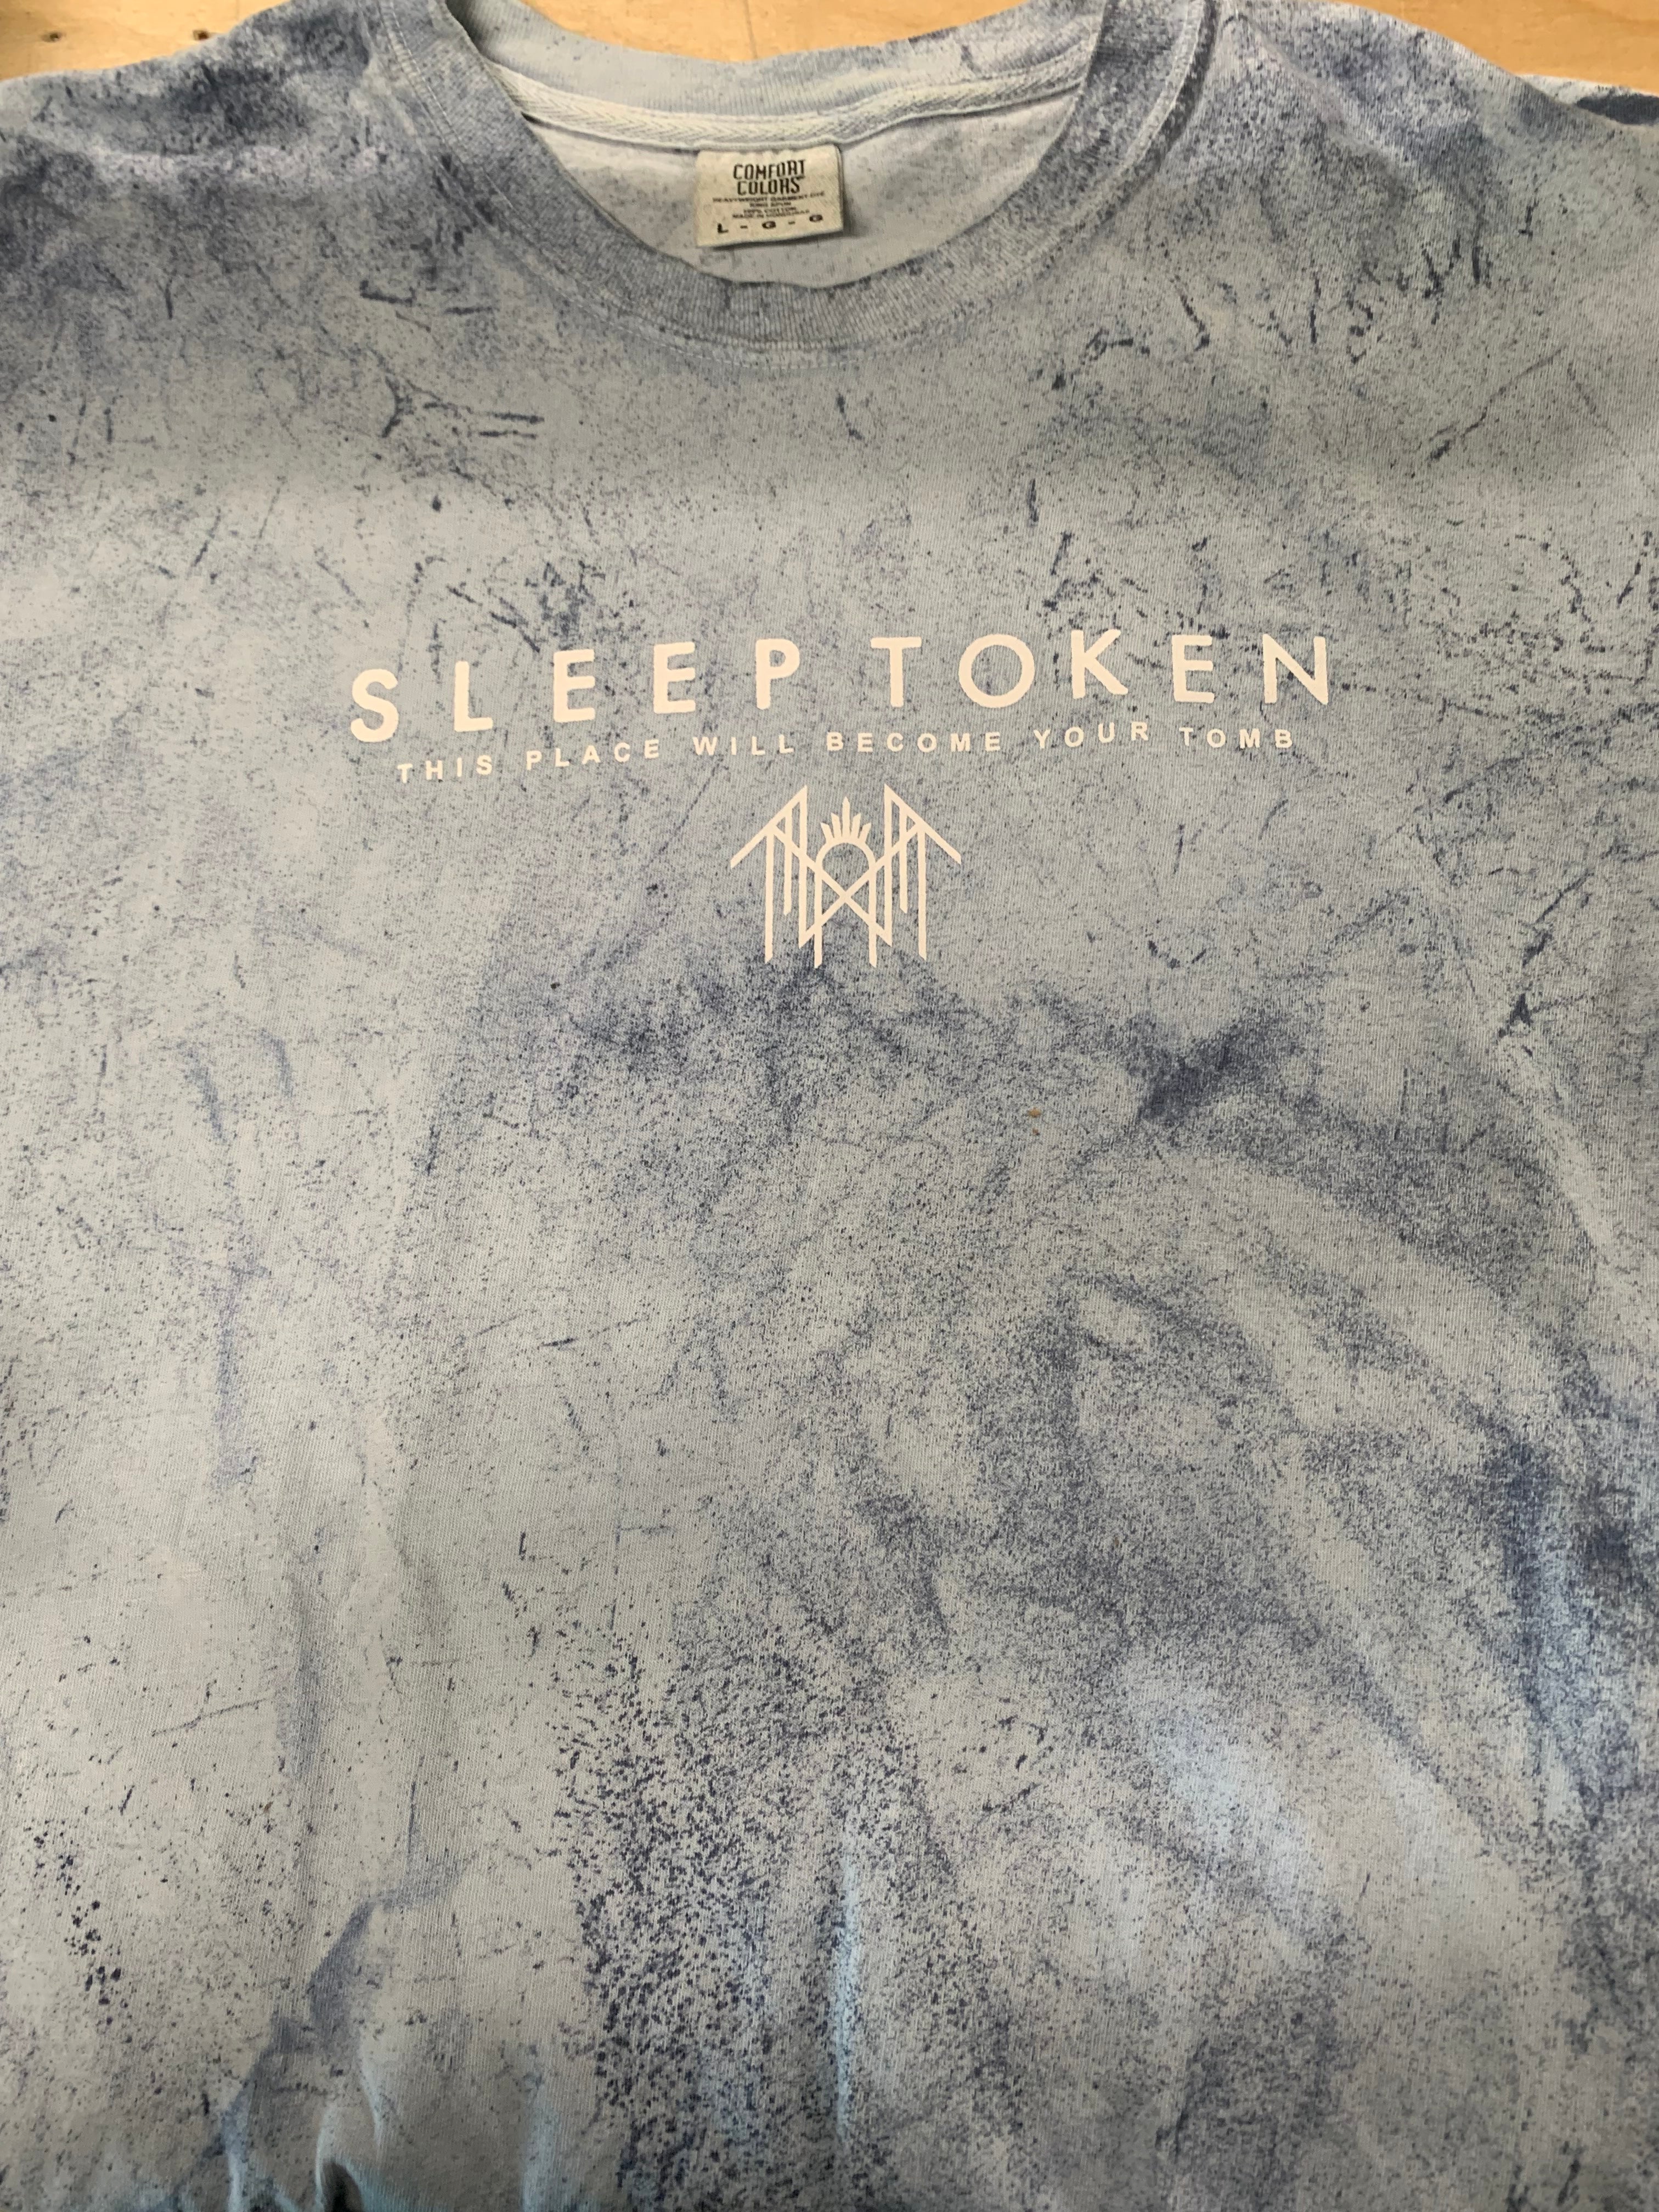 Sleep Token This Place Will Become Your Tomb T-Shirt, Faded Blue, L